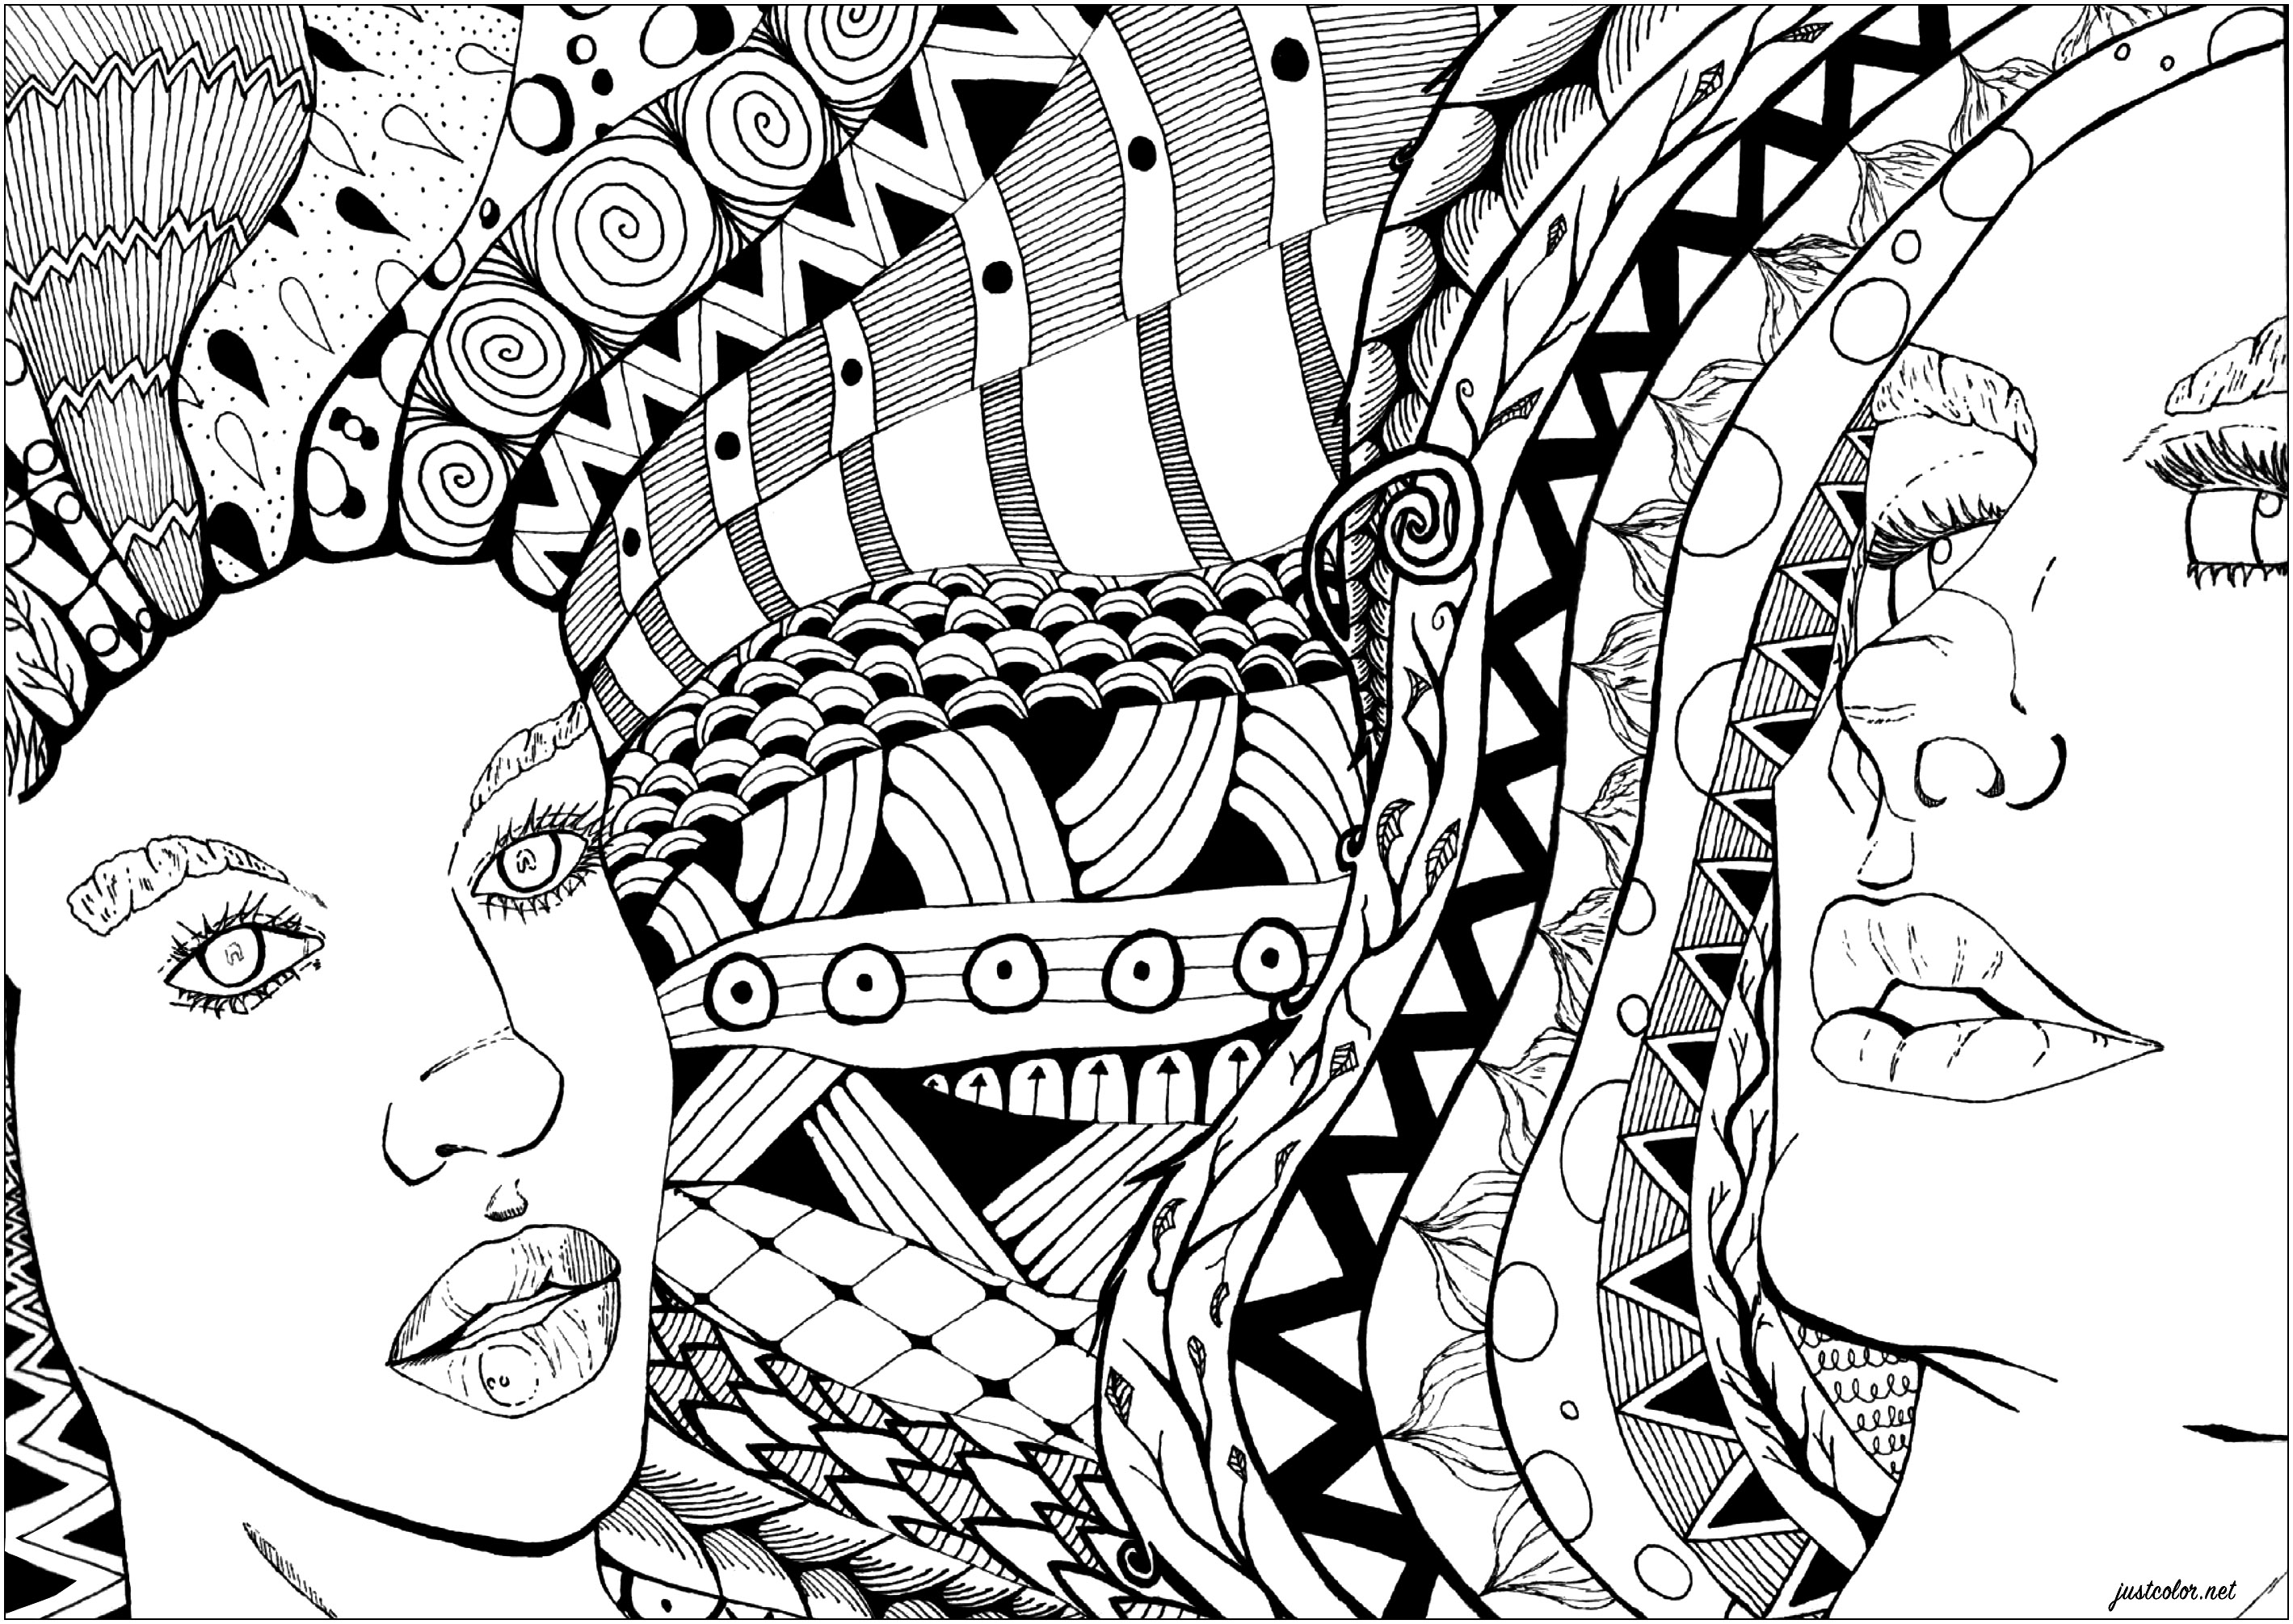 A beautiful design awaits your coloring skills, featuring two complex-haired women's faces with patterns drawn in the Zentangle style. Prepare to be absorbed by the fascinating details of each strand, and let your imagination run wild with color choices to bring these beautiful portraits to life, Artist : Amazian Y-A